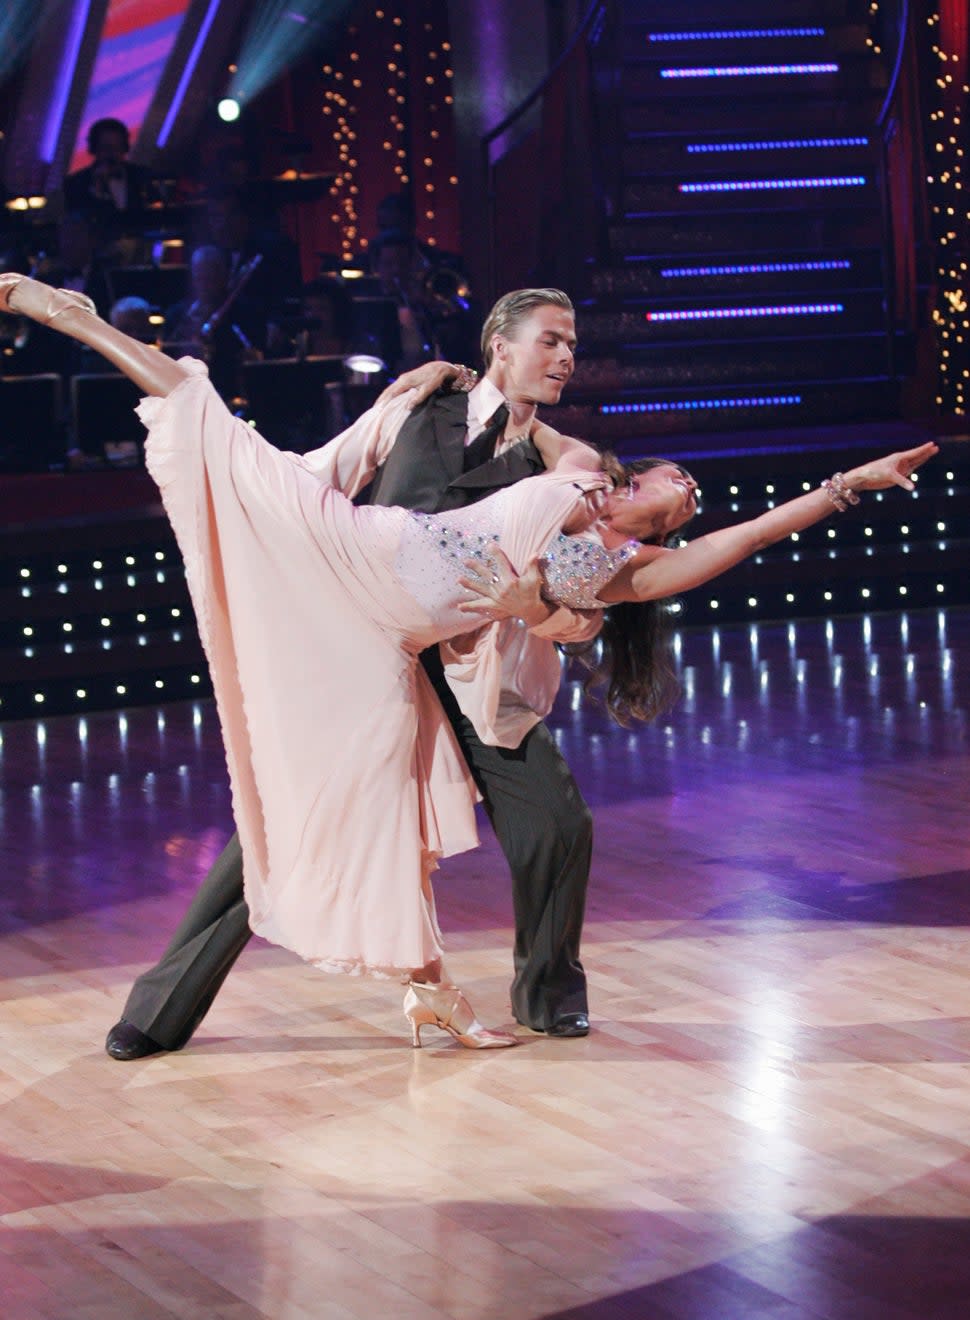 UNITED STATES - NOVEMBER 25: DANCING WITH THE STARS THE RESULTS SHOW - 